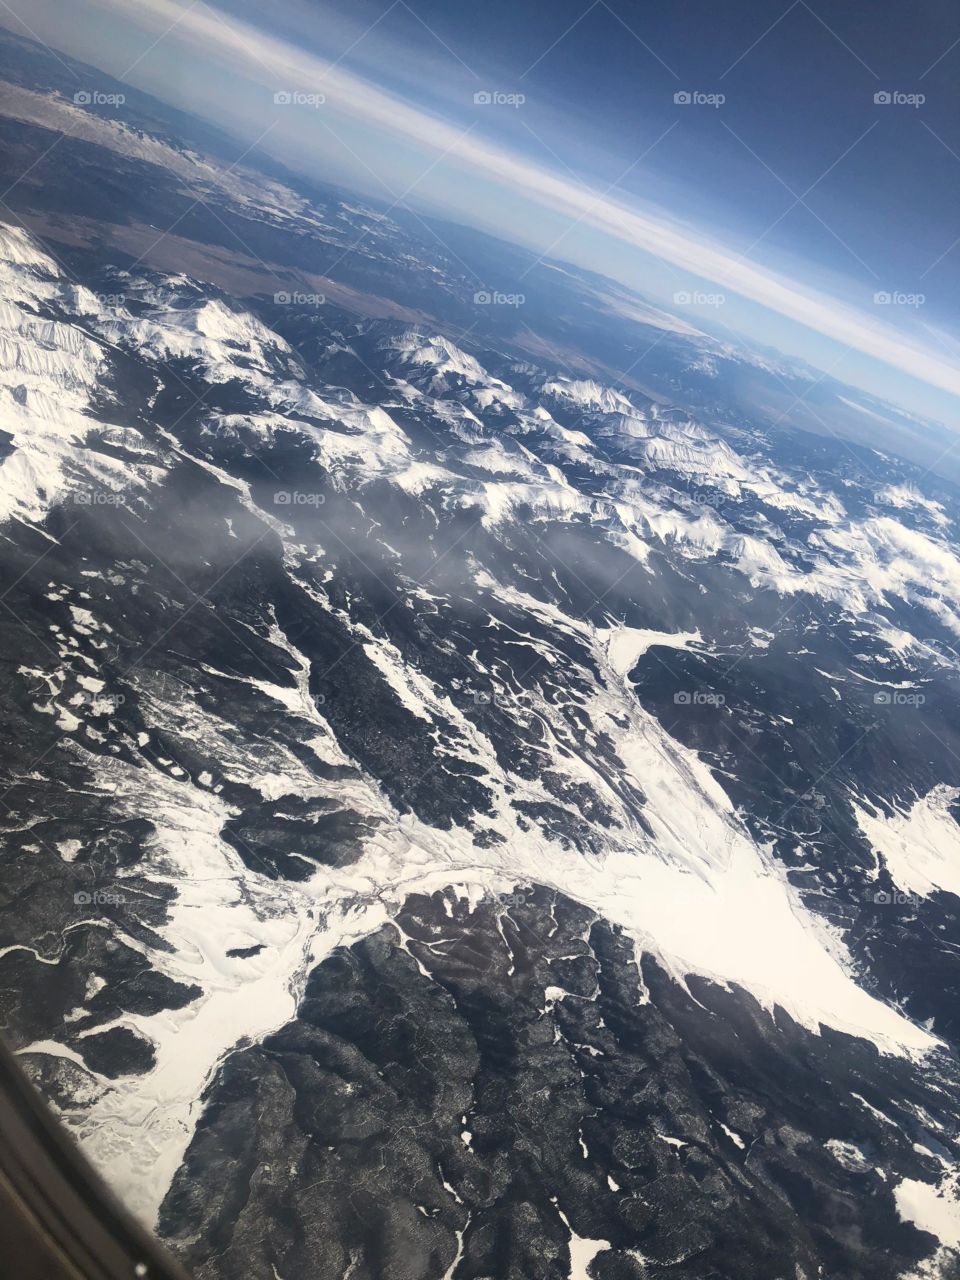 Flying over to Las Vegas from New York sore this view , amazing mountain range.